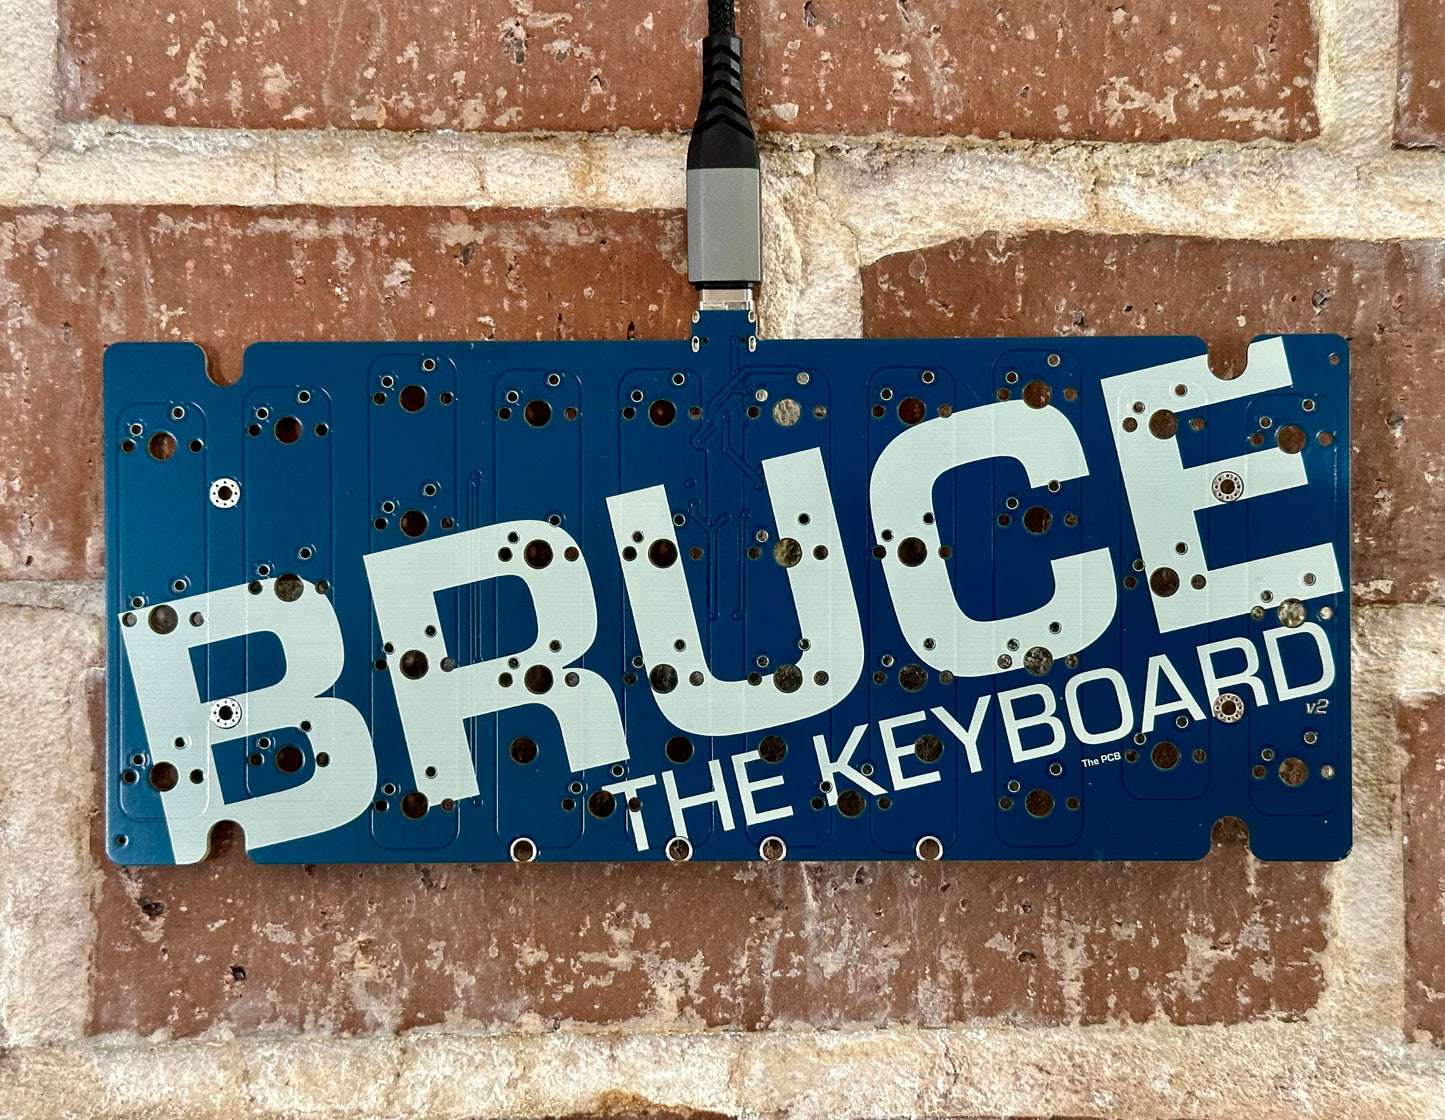 Bruce the Keyboard the PCB